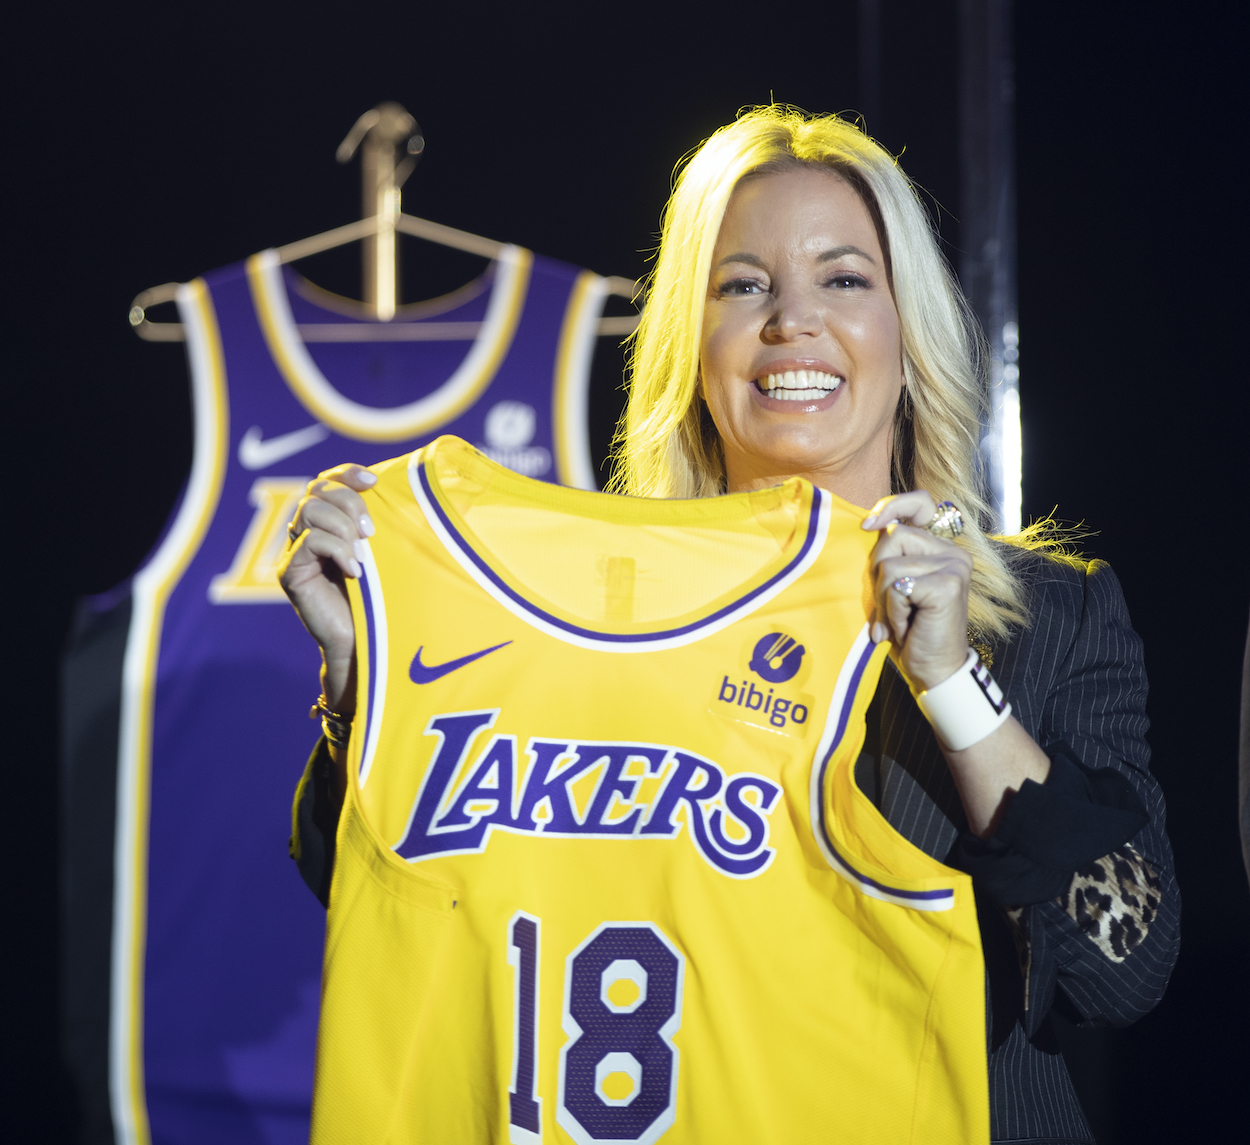 Bibigo Is Los Angeles Lakers' First Global Partner, Becoming The First  Korean Company To Secure NBA Sponsorship Deal - Koreaboo